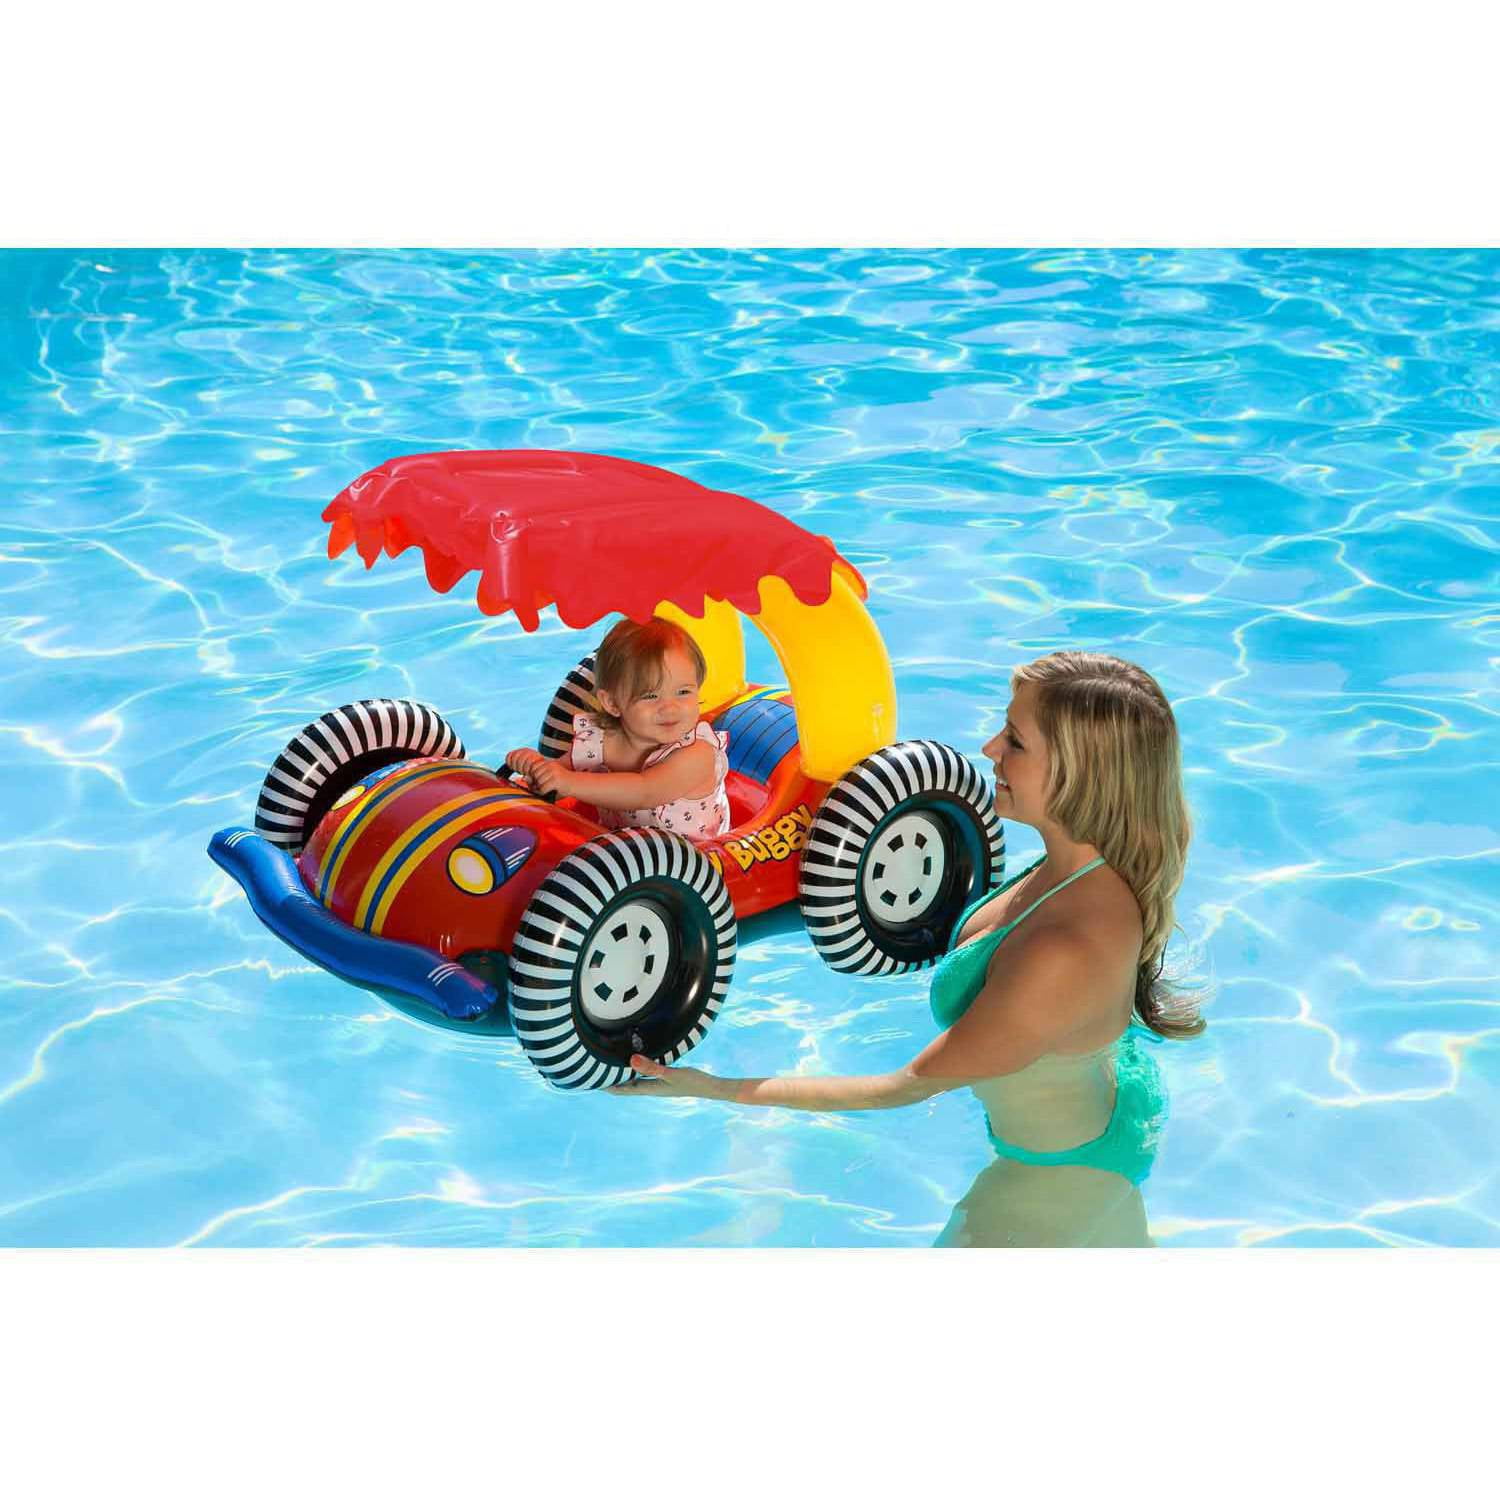 Giraffe Poolmaster 81543 Learn-to-Swim Swimming Pool Float Baby Rider with Sun Protection 